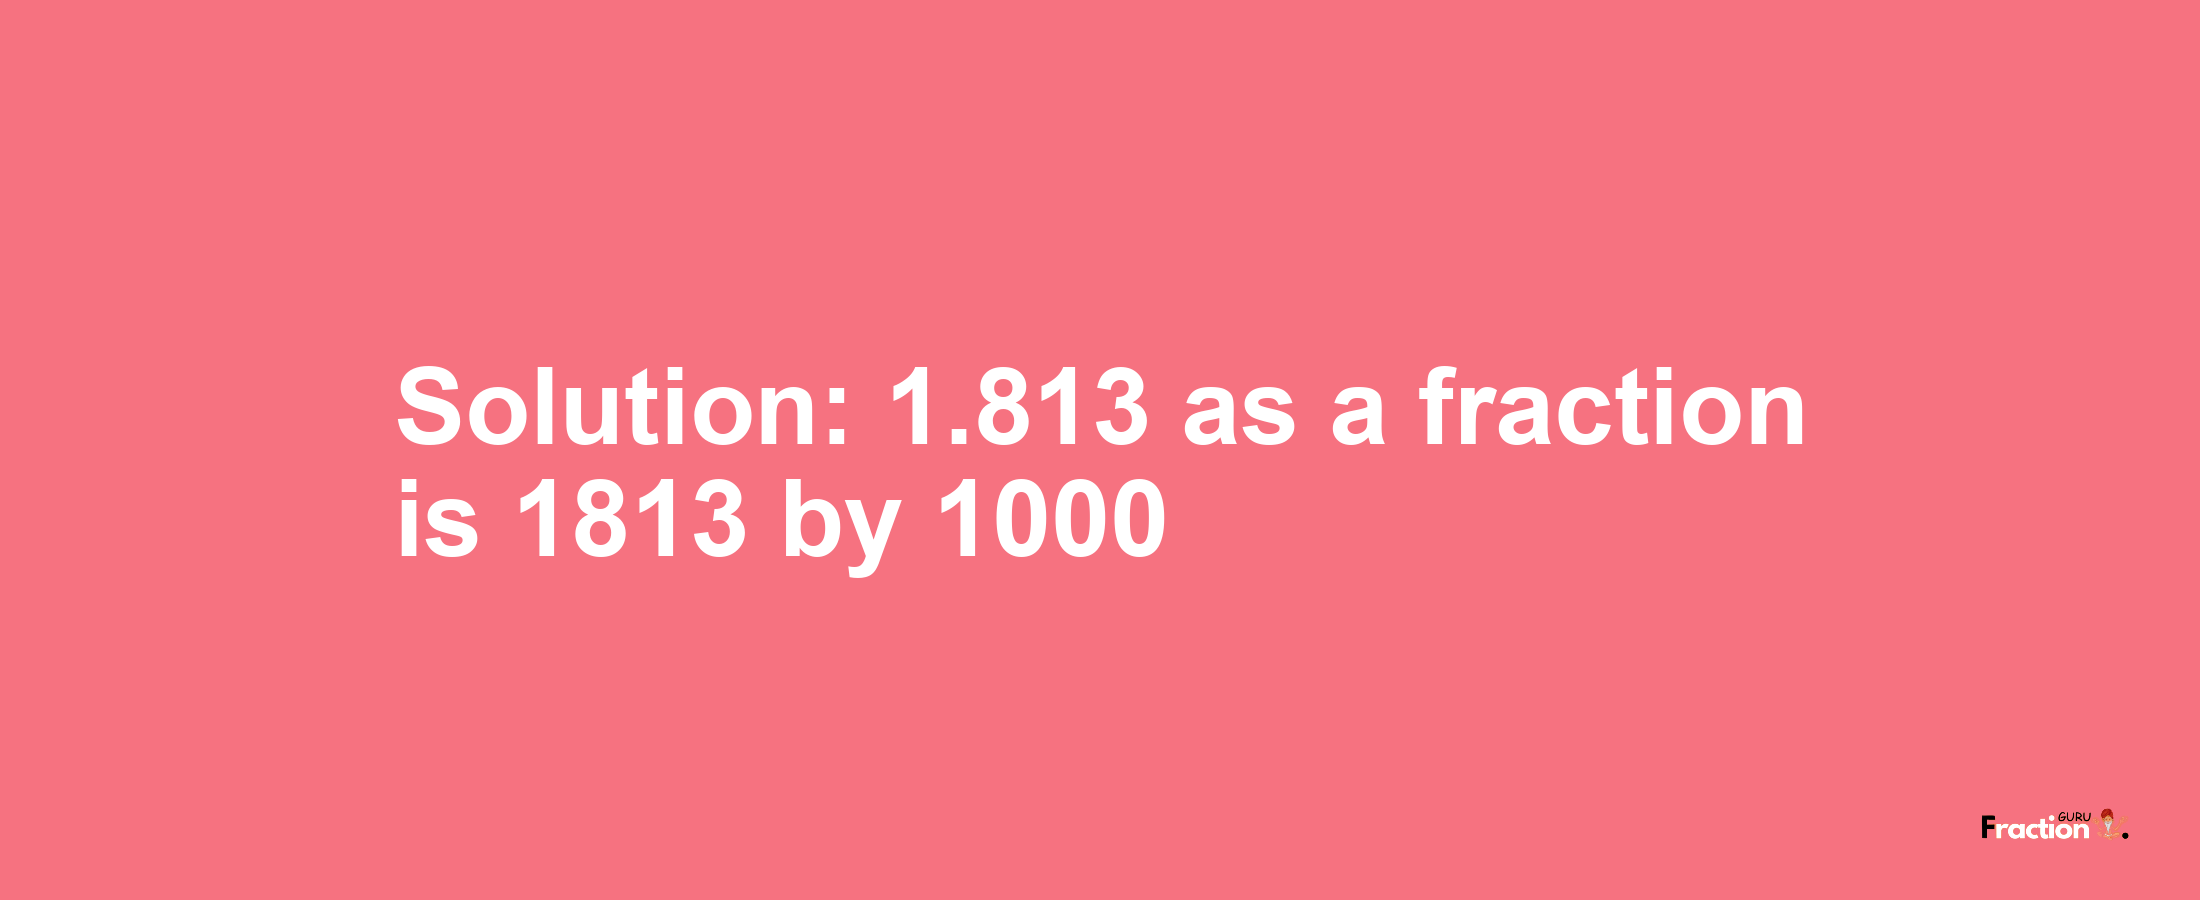 Solution:1.813 as a fraction is 1813/1000